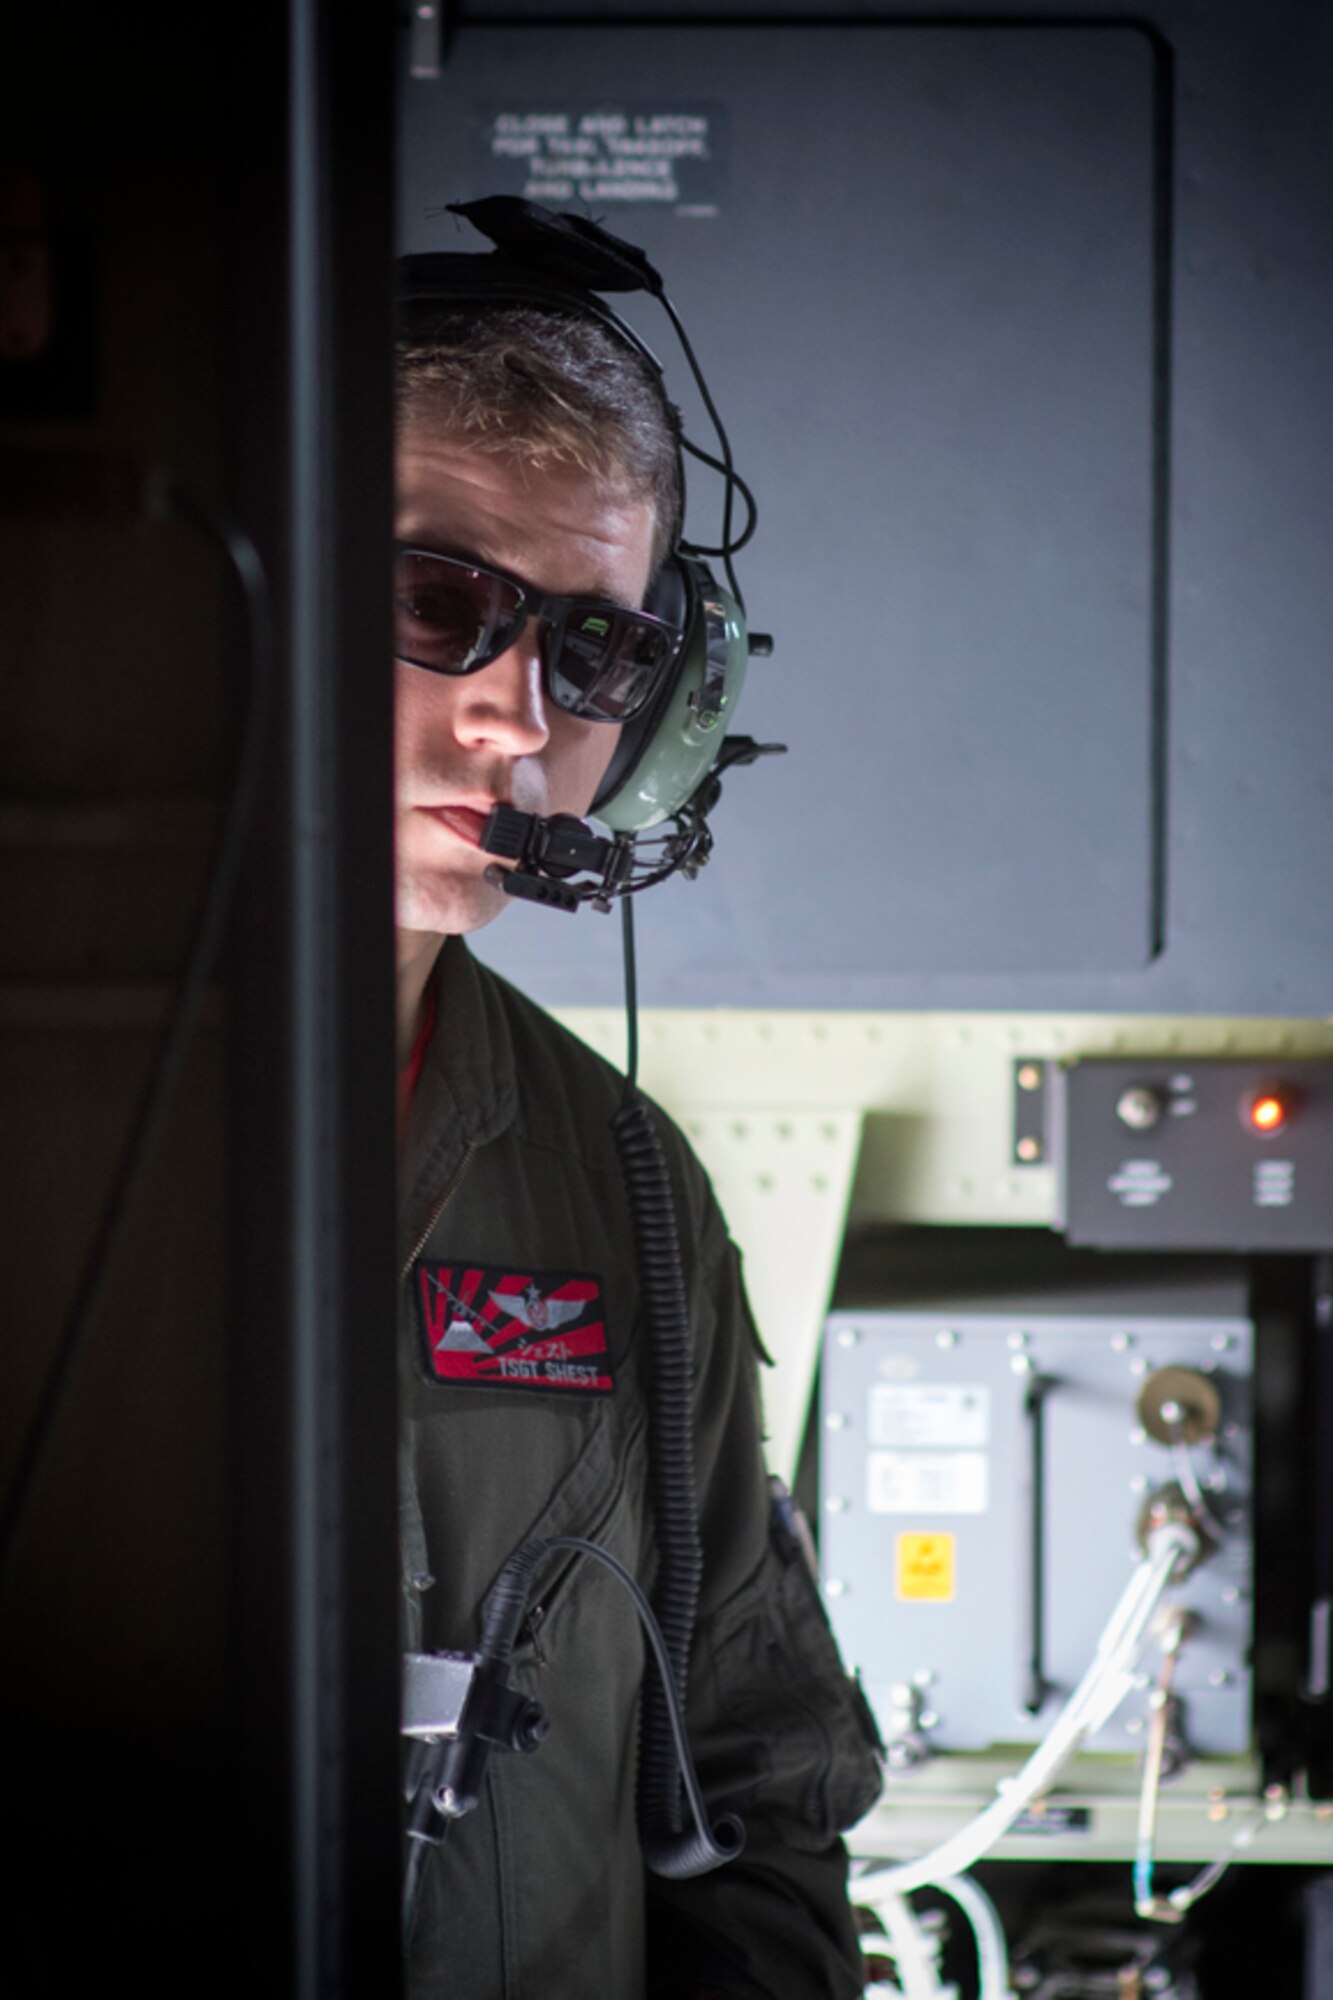 TSgt Shest communicates with crew members on a C-130J Super Hercules